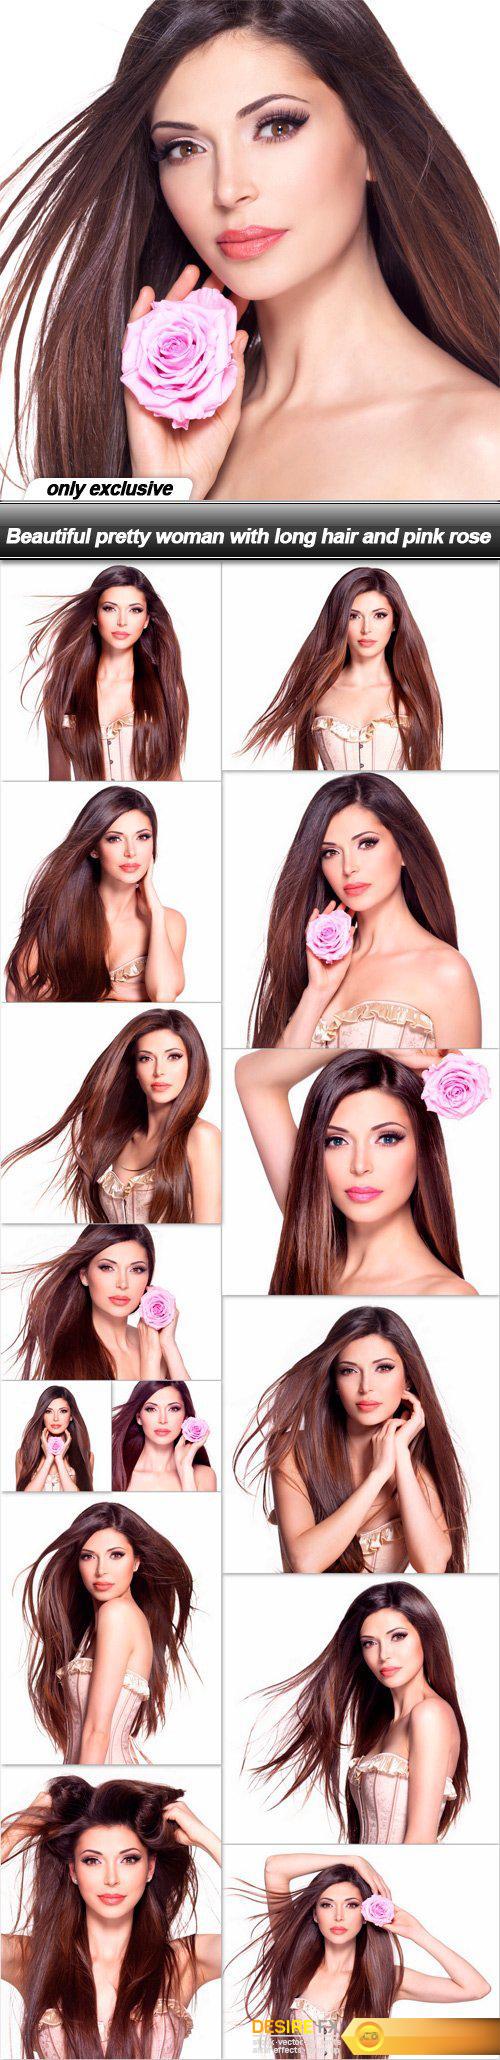 Beautiful pretty woman with long hair and pink rose - 15 UHQ JPEG